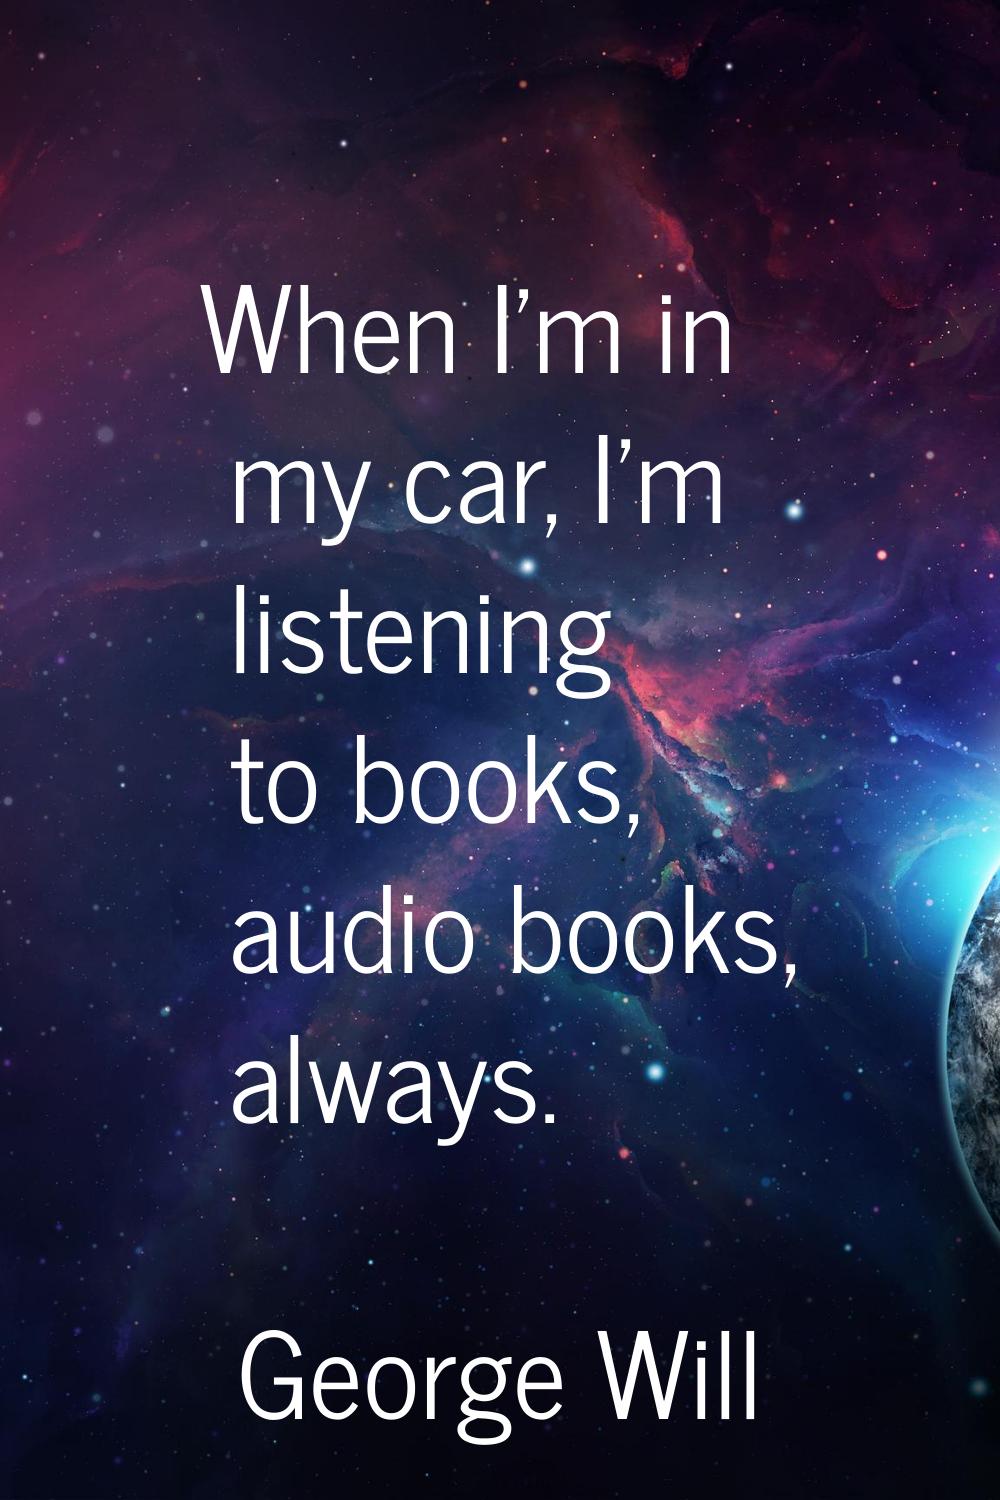 When I'm in my car, I'm listening to books, audio books, always.